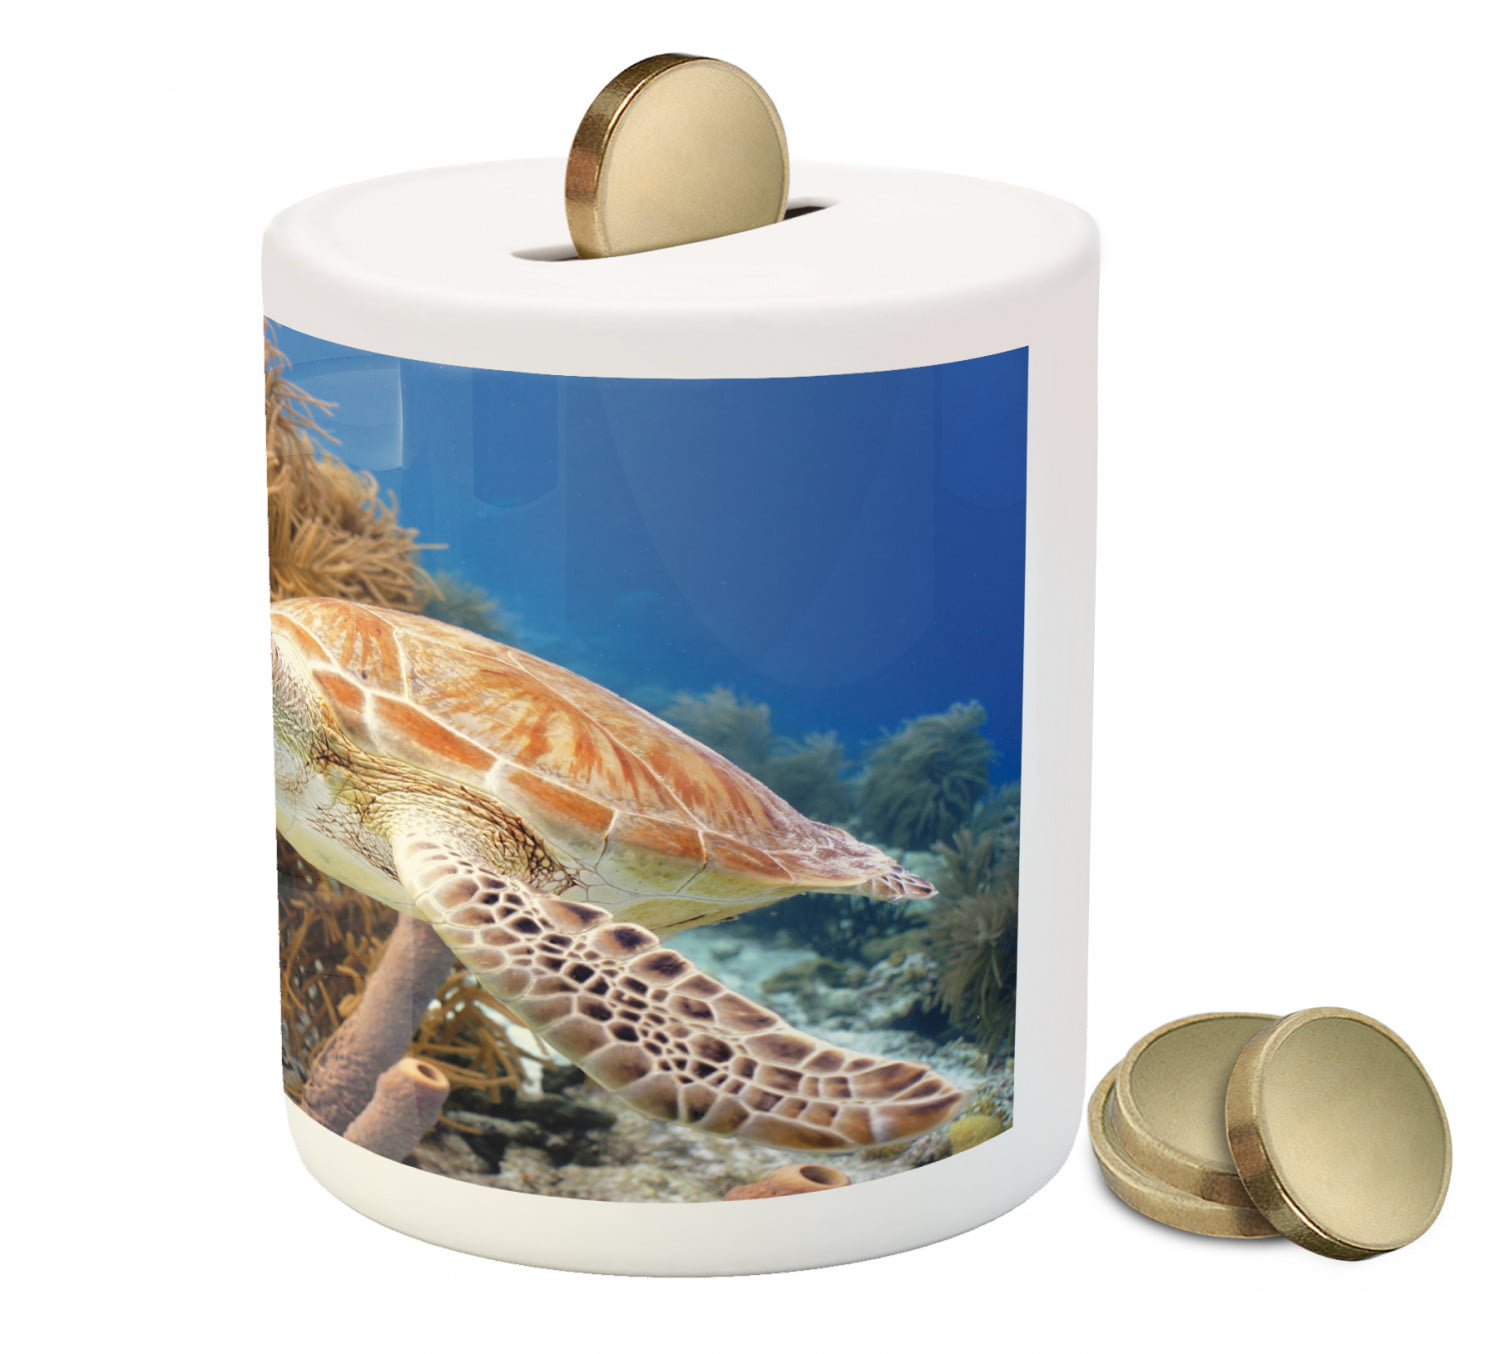 new money box boxes bank sea life turtle nice quality will make good little gift 